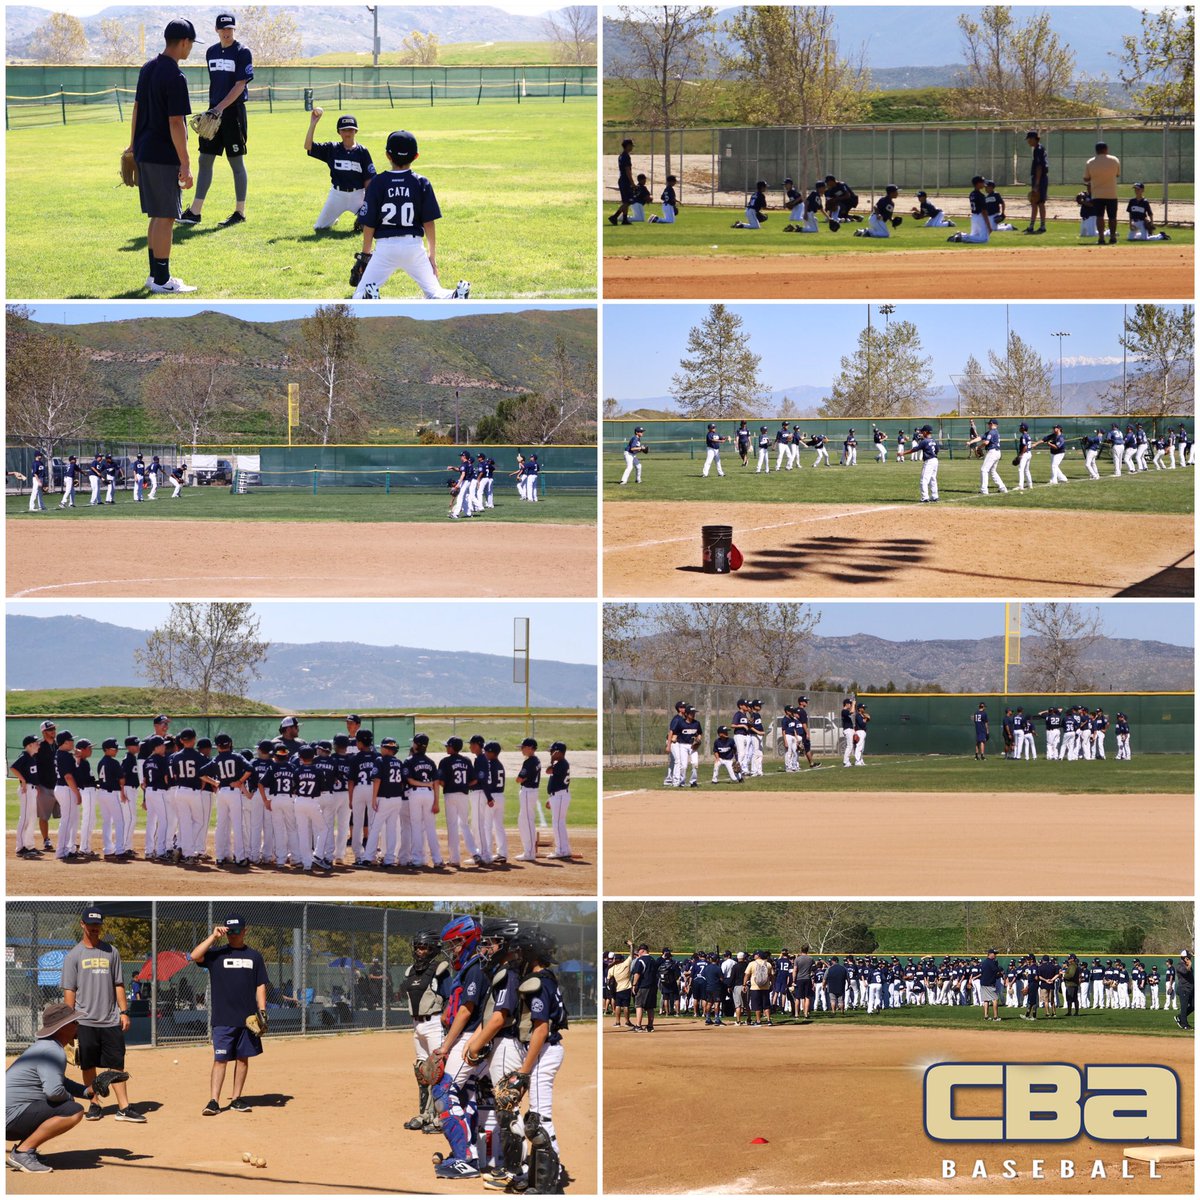 Amazing day at the 1st Annual CBA Youth Futures Event! Thank you to everyone involved for making this such a memorable event. #programstrong #weareCBA #farmsystem #CBAbulldogs #CBAtitans #CBAwave #CBAvikings #CBAtrojans #CBAdirtbags #CBAbruins